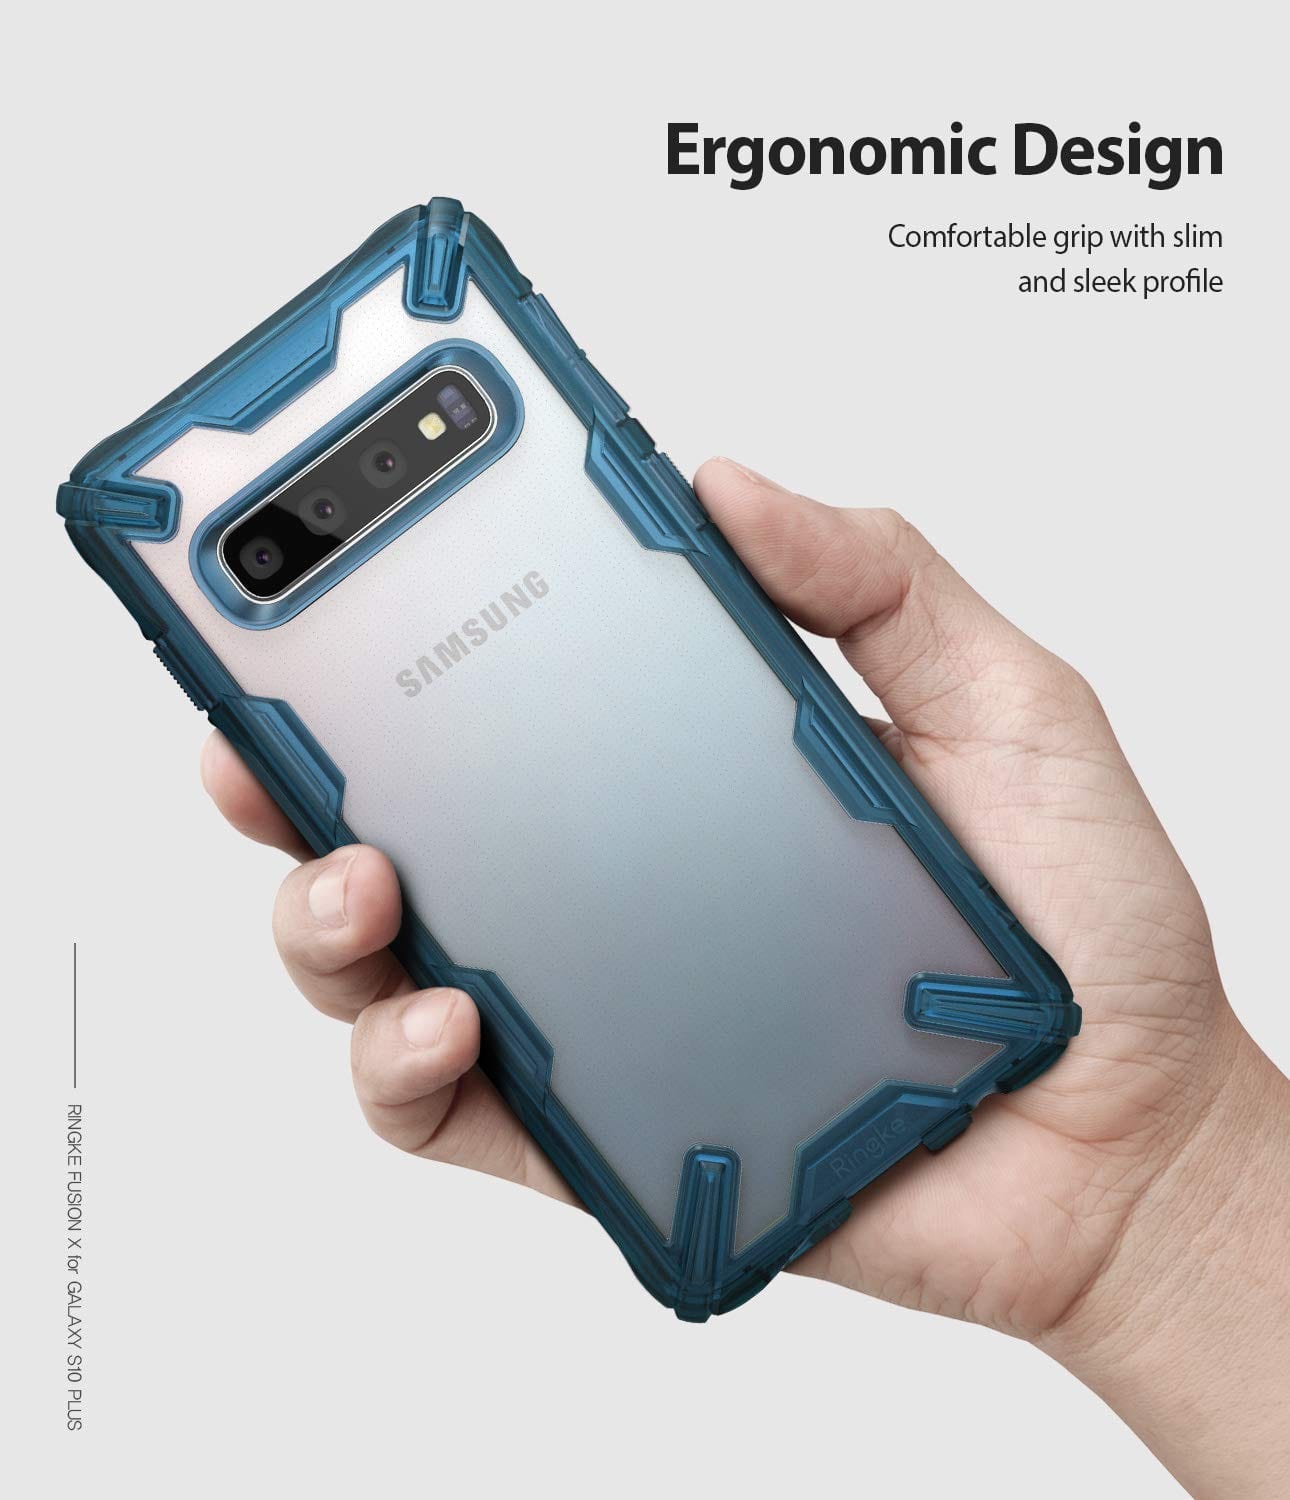 Ringke FusionX Galaxy S10 Plus Case: Comfortable Grip with Slim and Sleek Profile